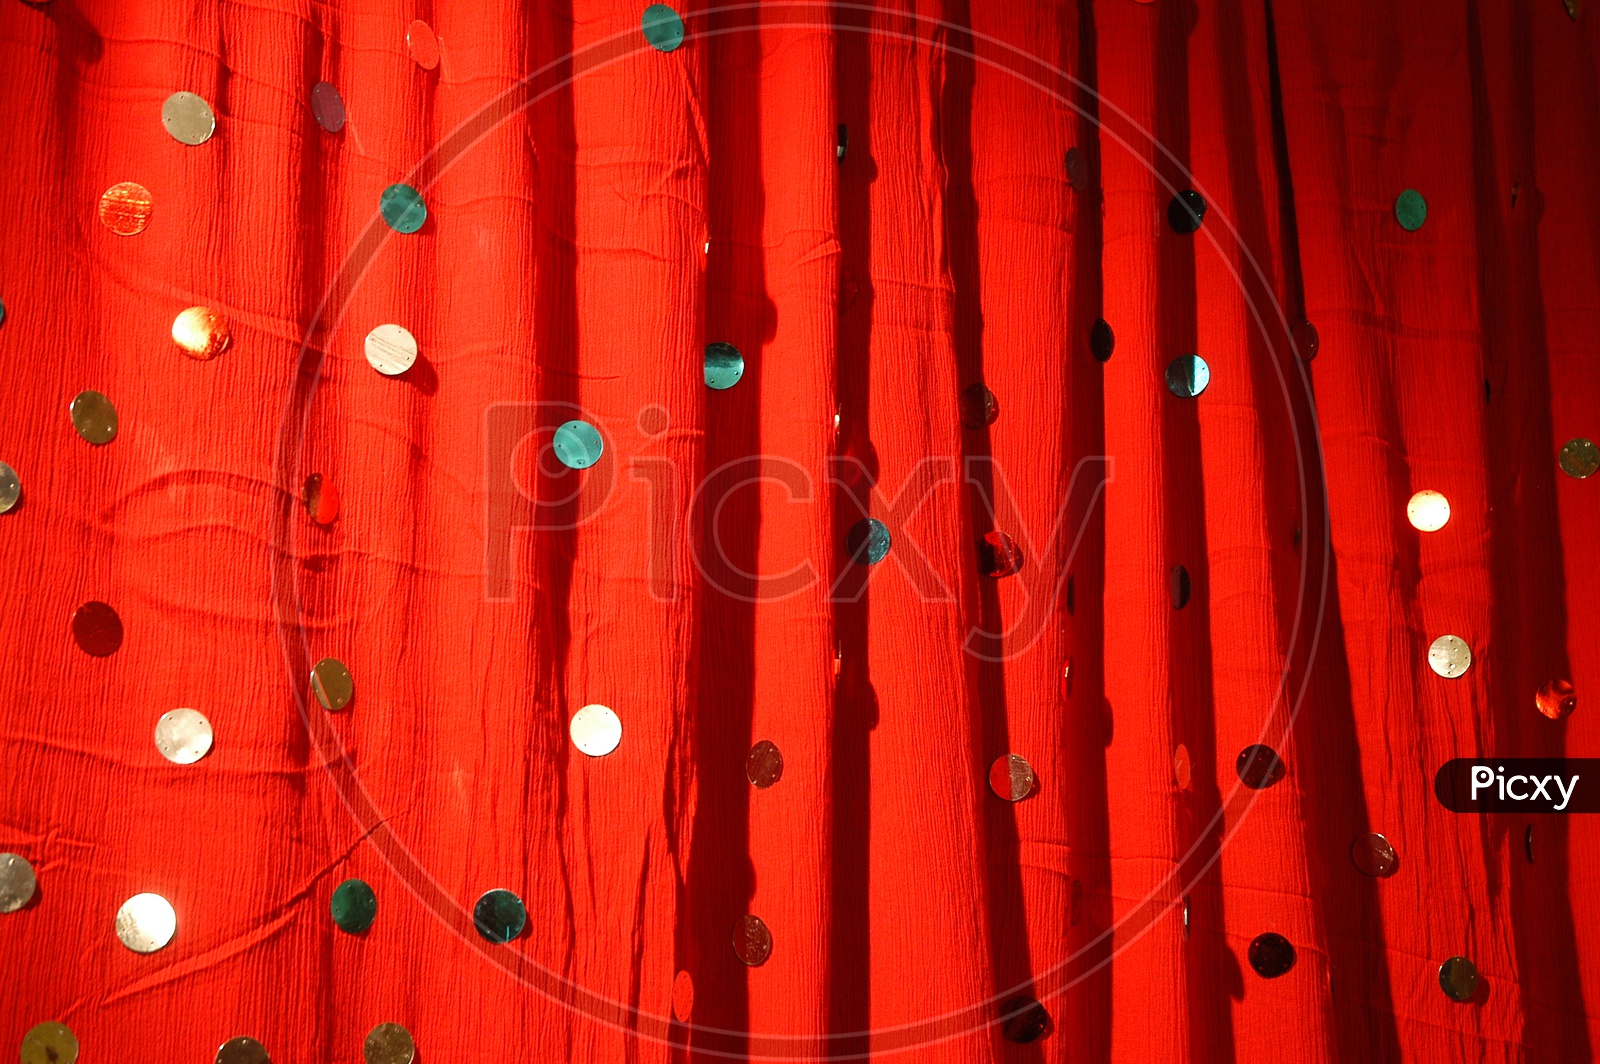 Embroidery beads on the red curtain